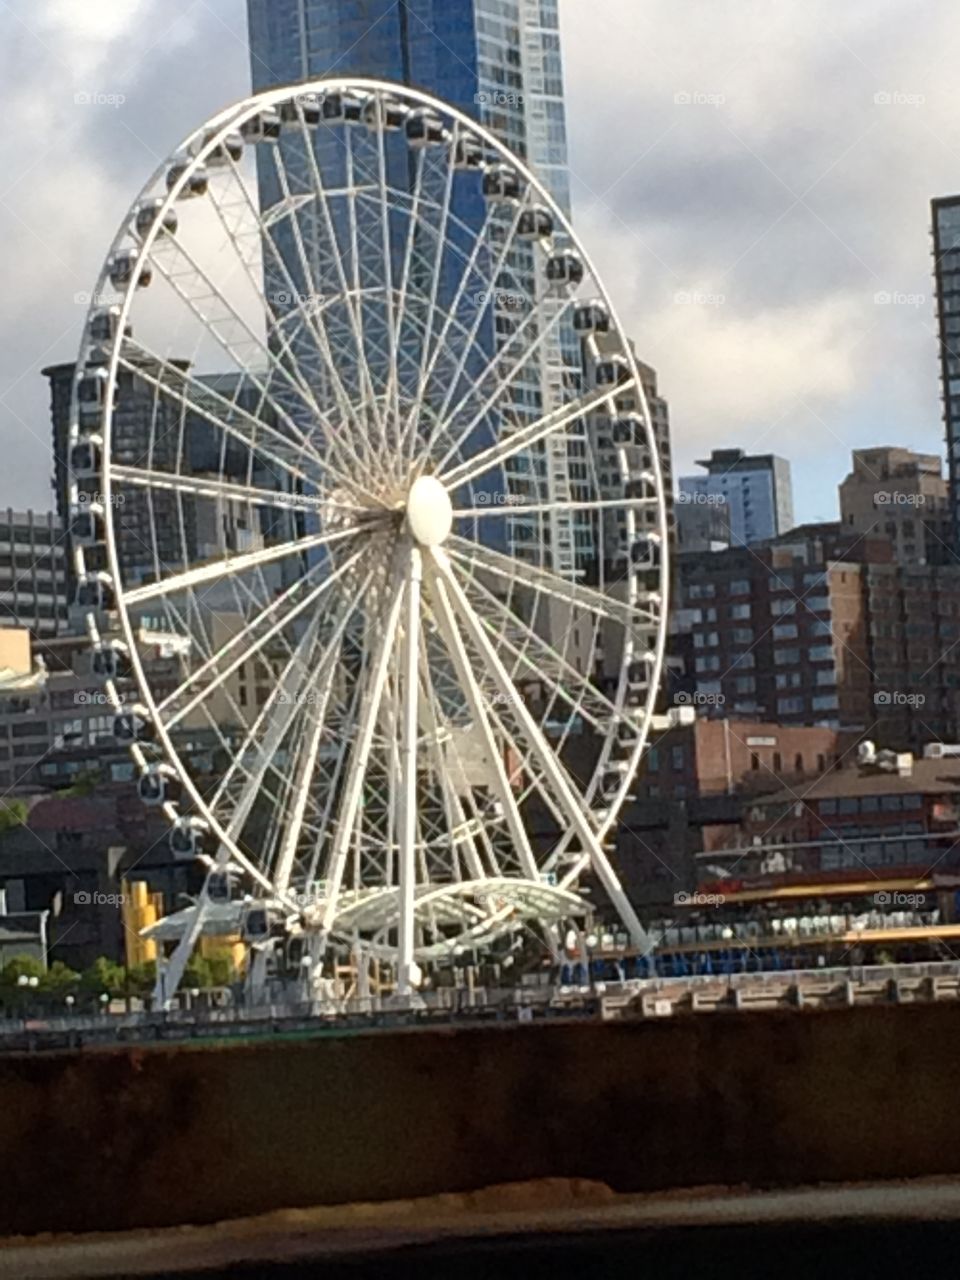 The Great Wheel. Seattle iconic wheel on the waterfront